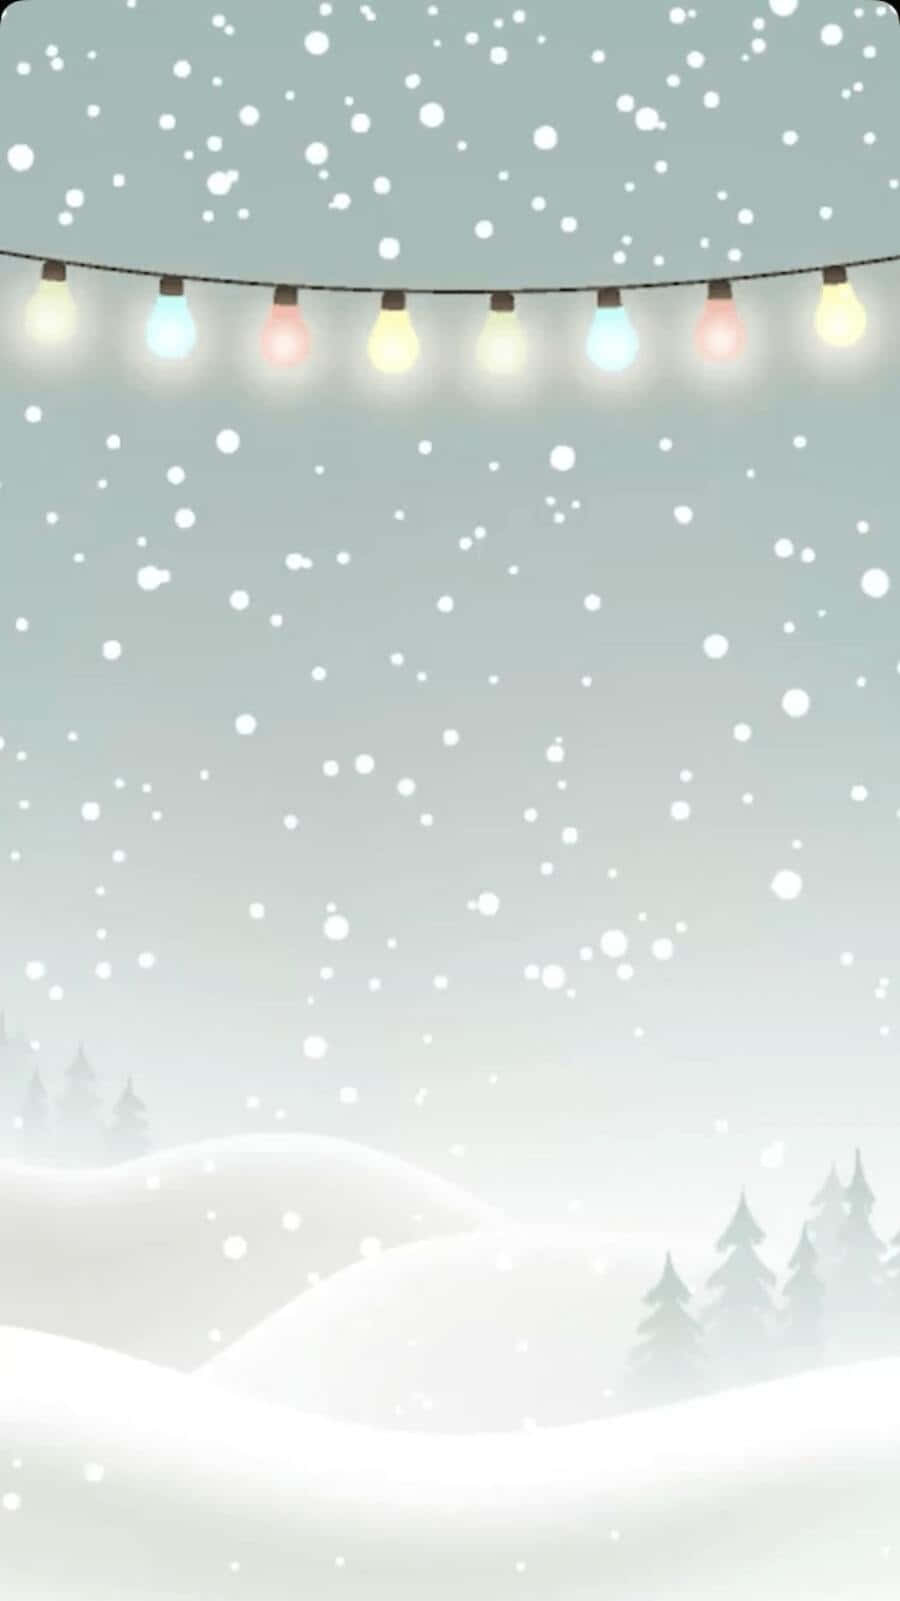 Embrace The Cozy Winter Vibes With This Beautiful Snow-covered Landscape. Background